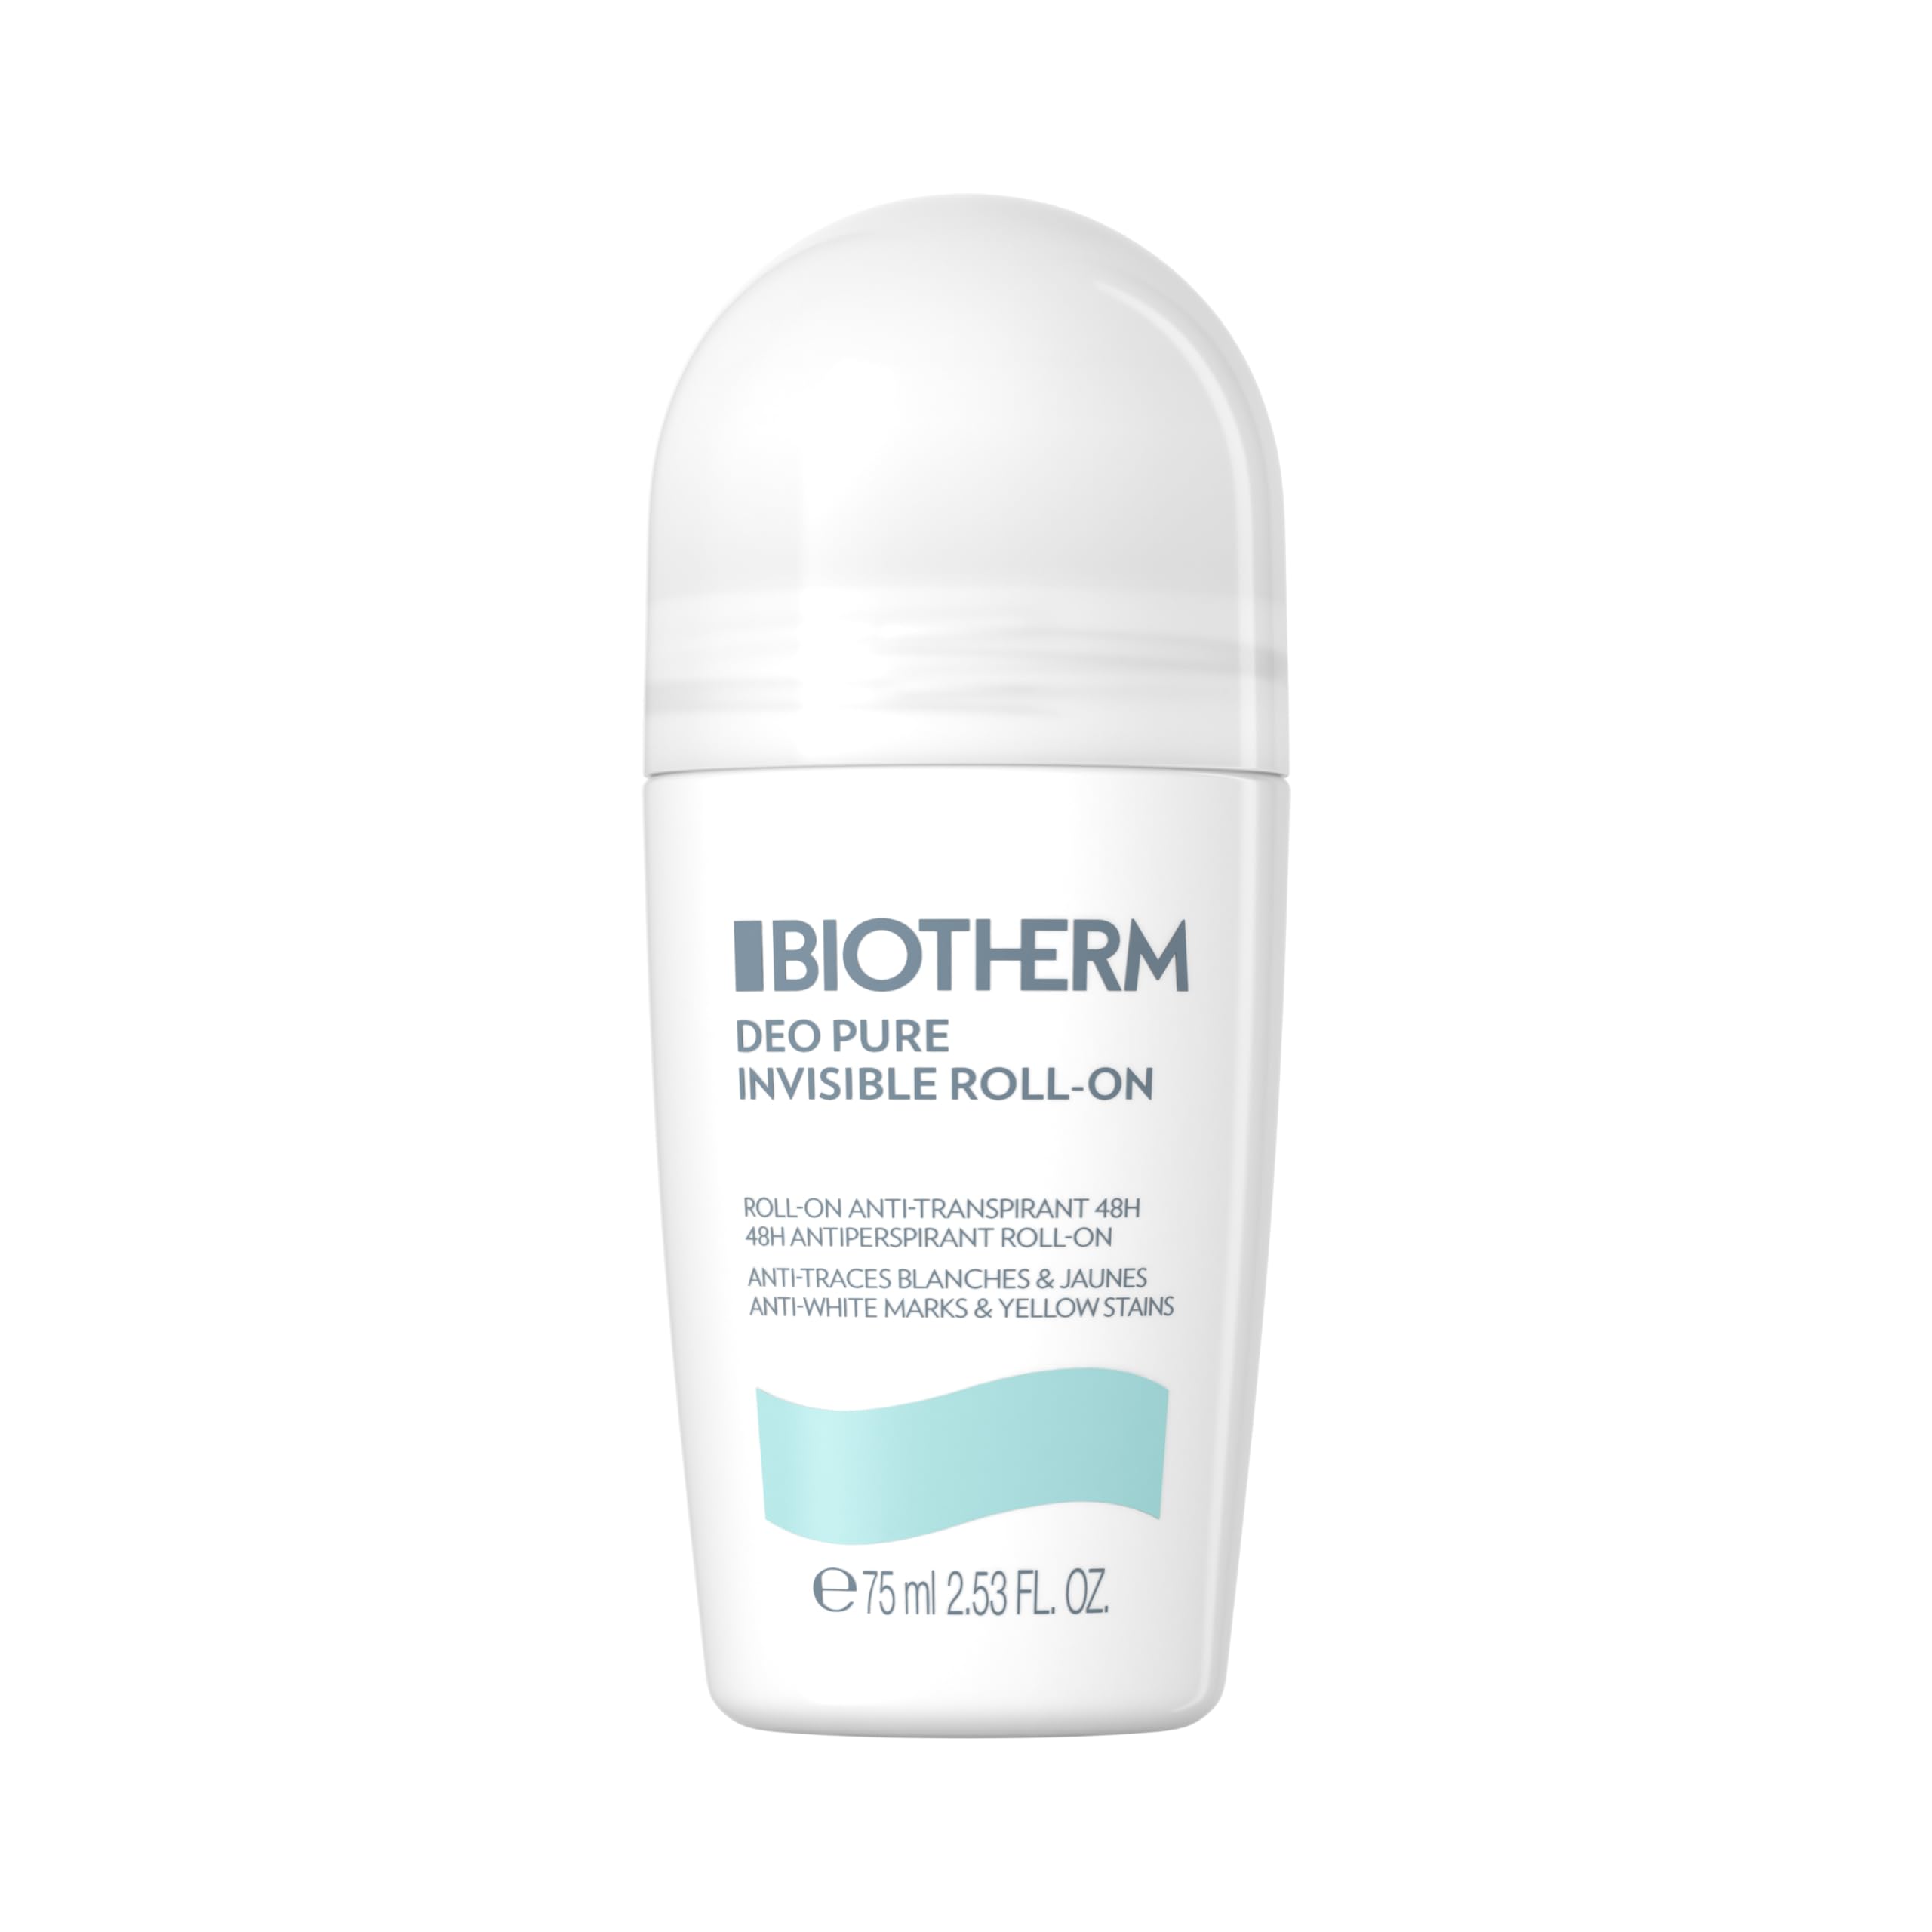 Biotherm Deo Pure Invisible Antiperspirant Roll-On, Fresh, 2.53 Fl Oz